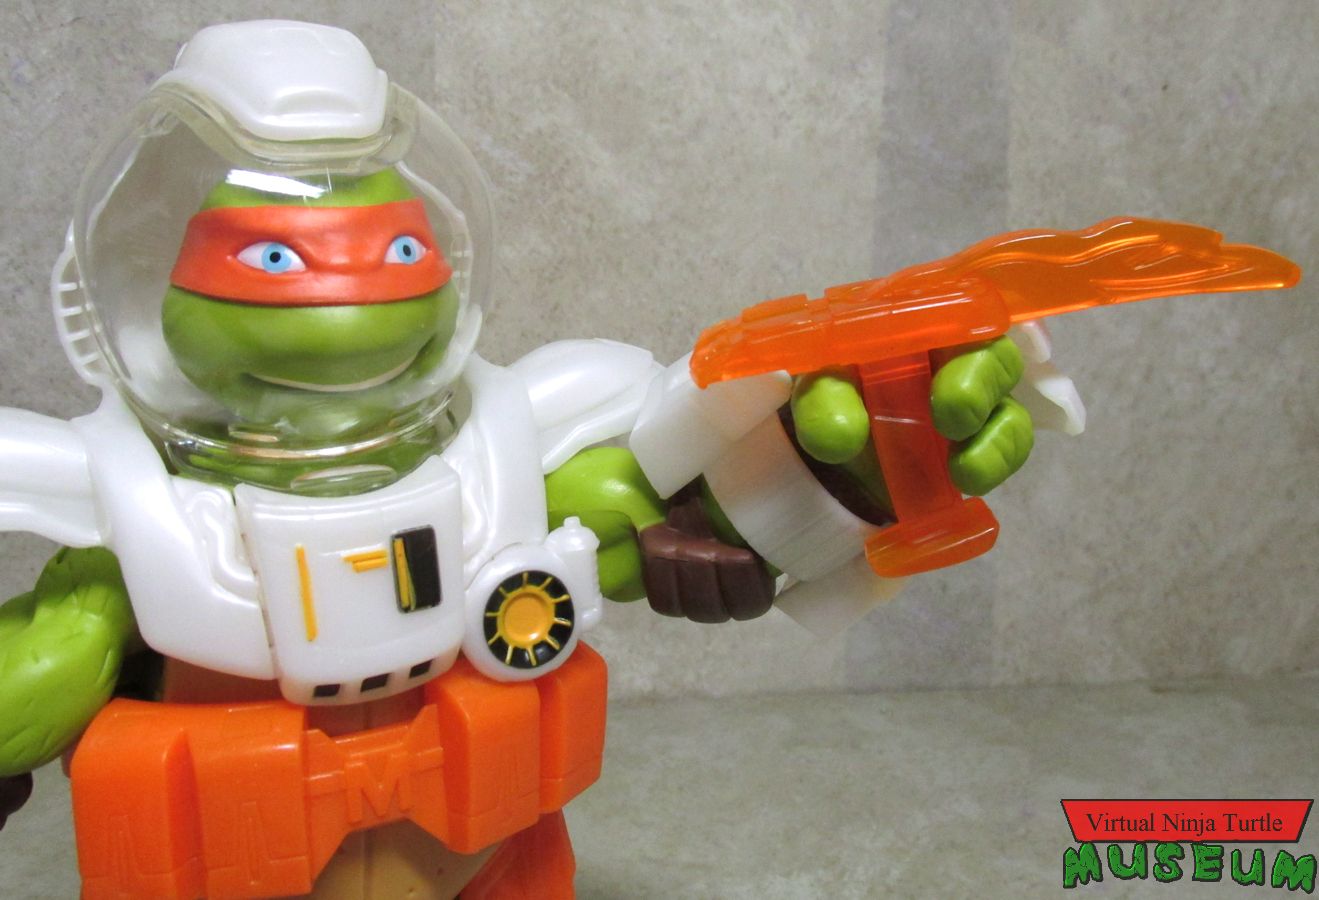 Dimension X Michelangelo with weapons